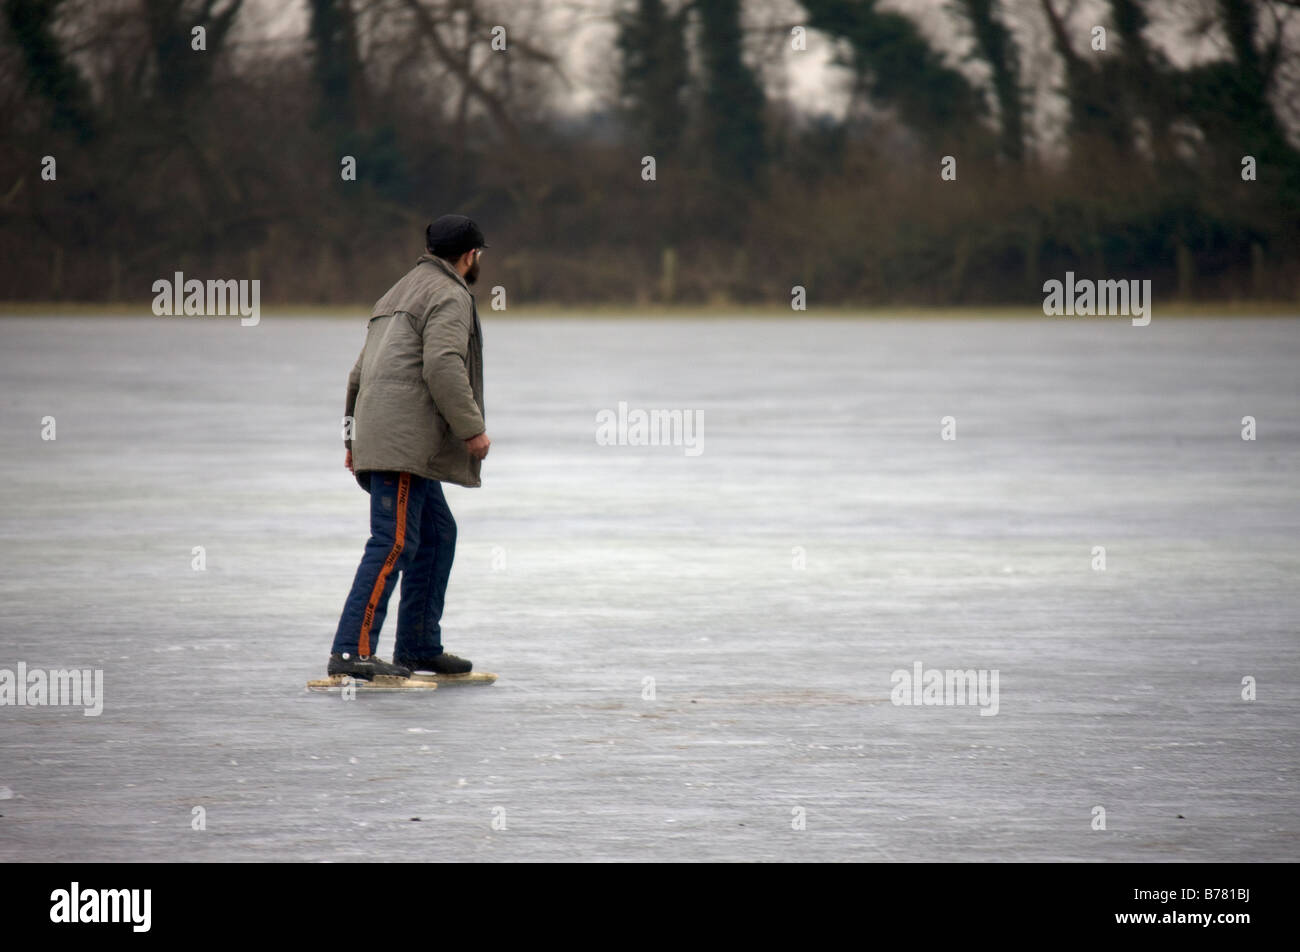 An infrequent opportunity to take advantage of the weather for some free skating on the local frozen fen. Stock Photo